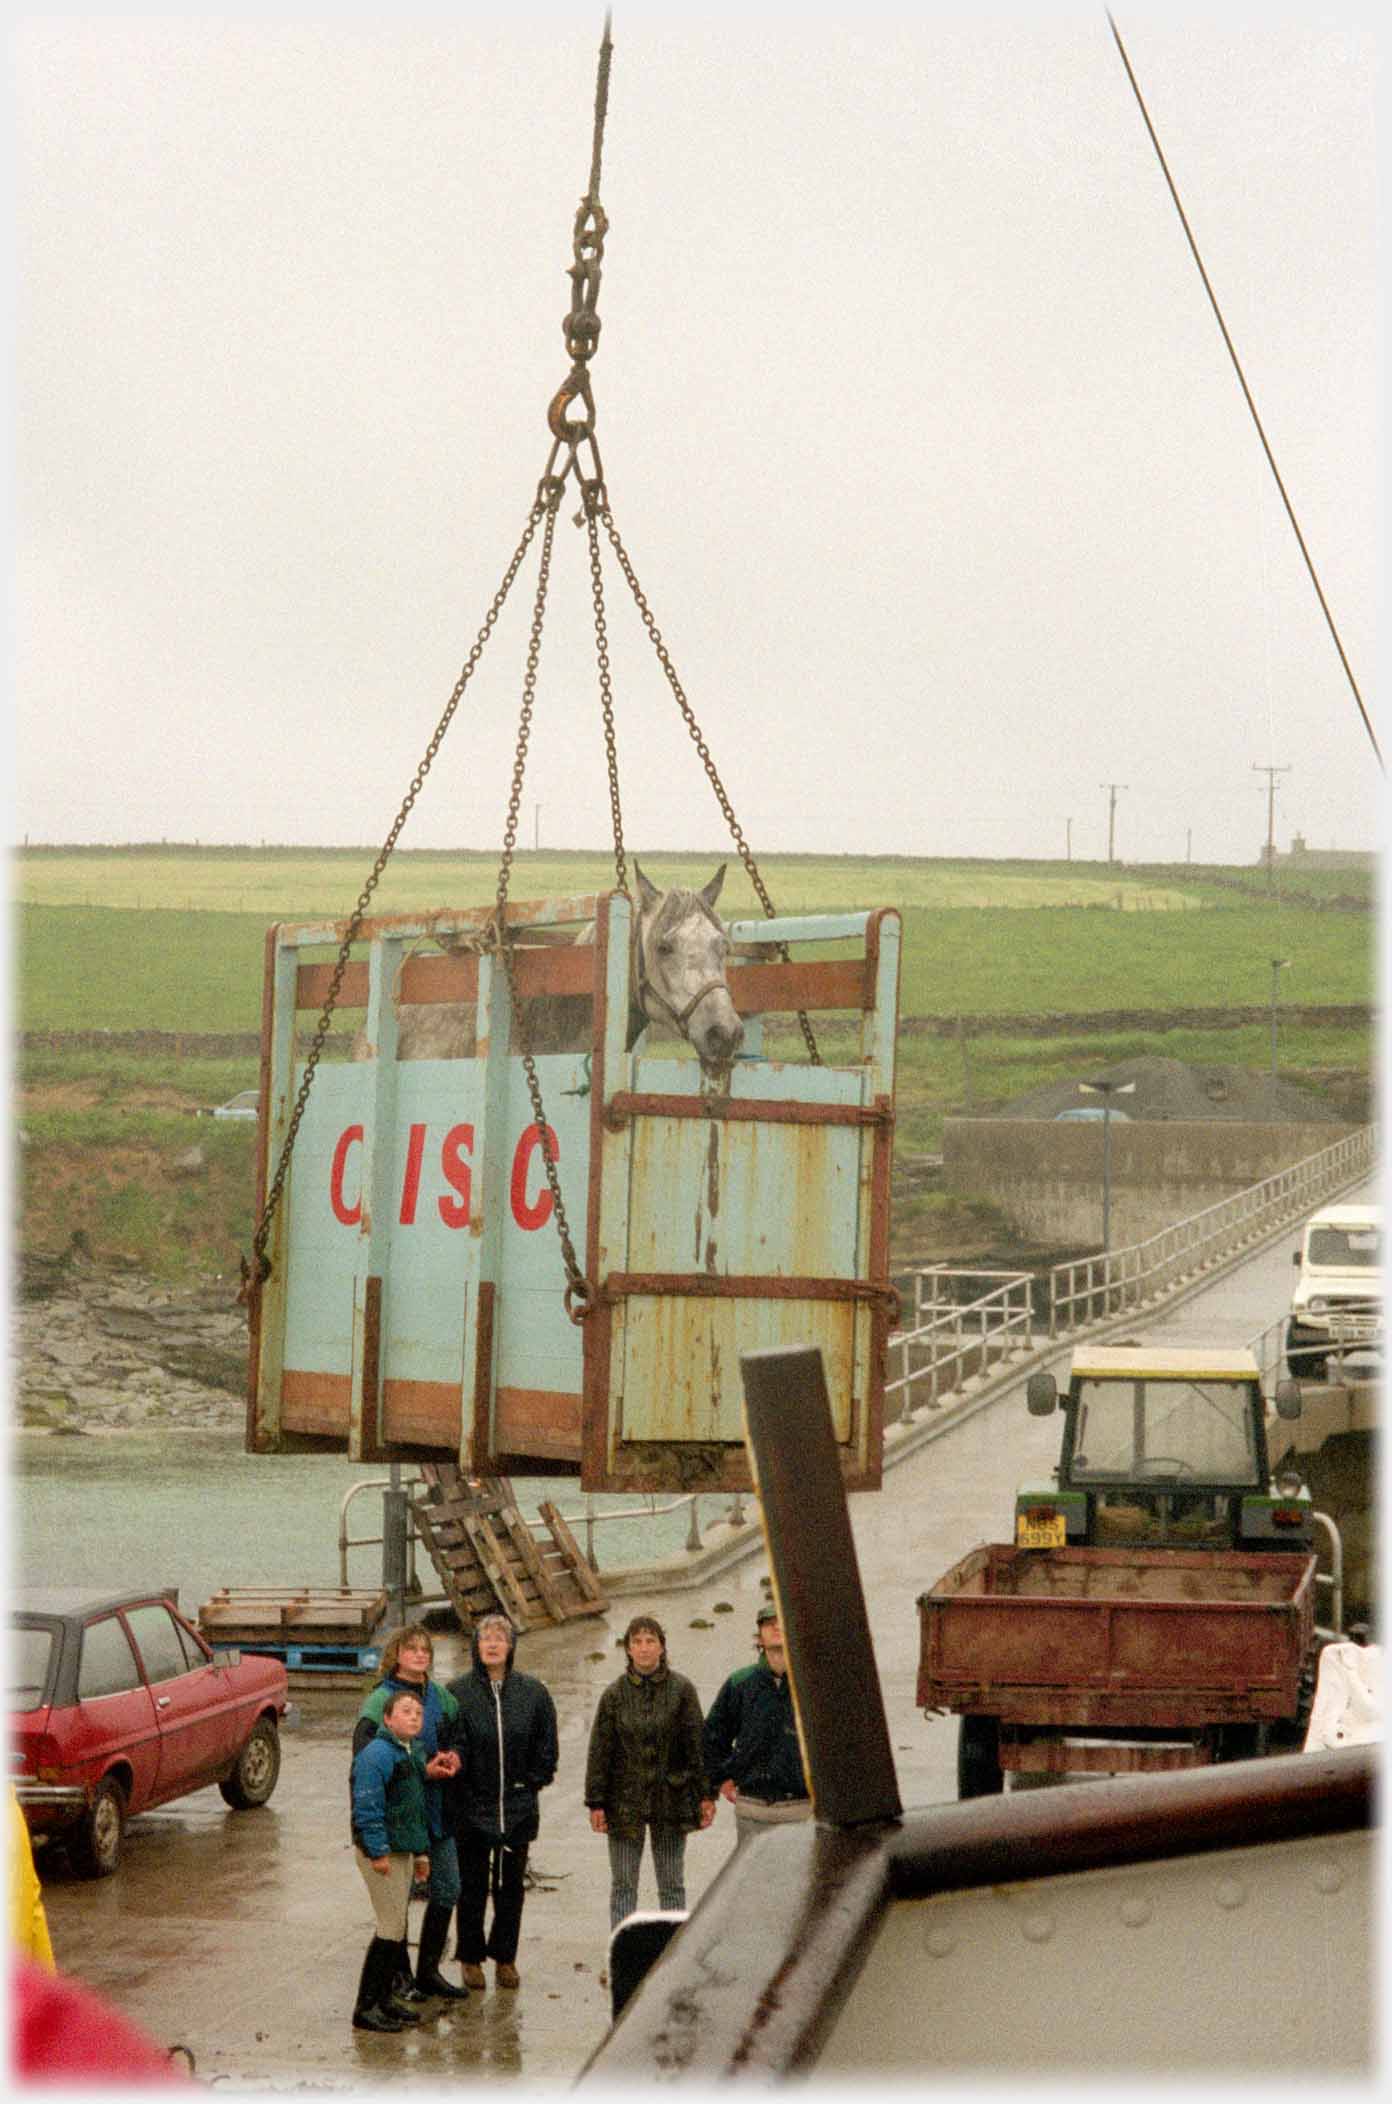 Horse in an open topped box being lowered onto pier.